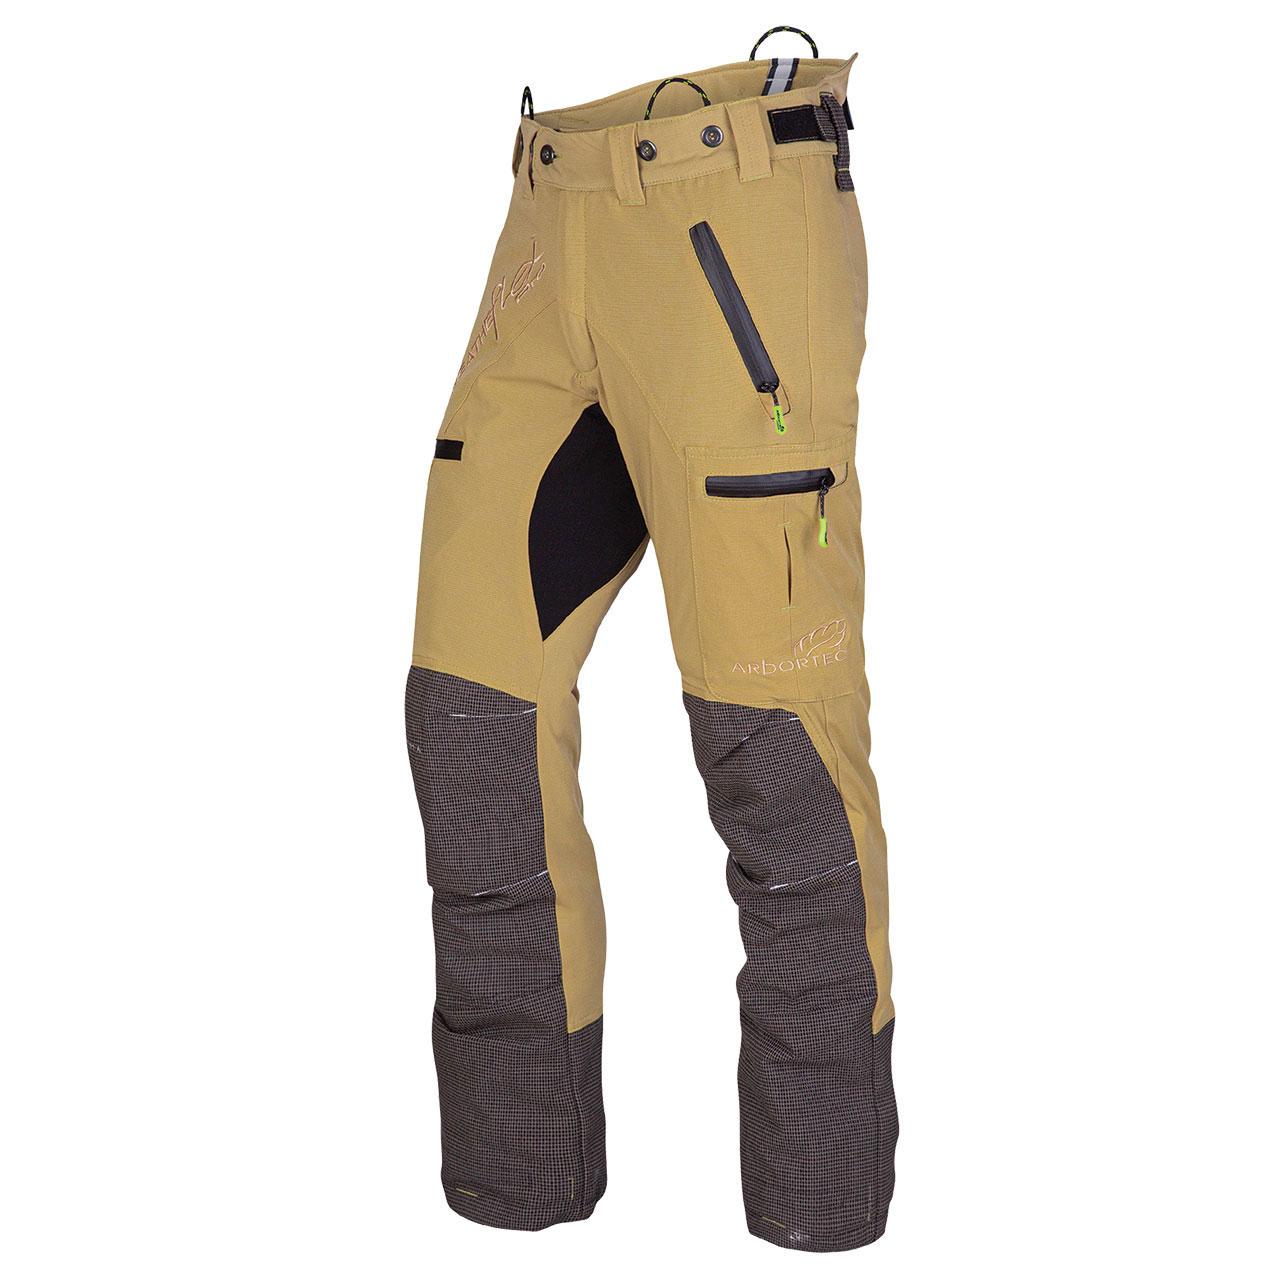 Solidur Infinity Type A Chainsaw Trousers Orange